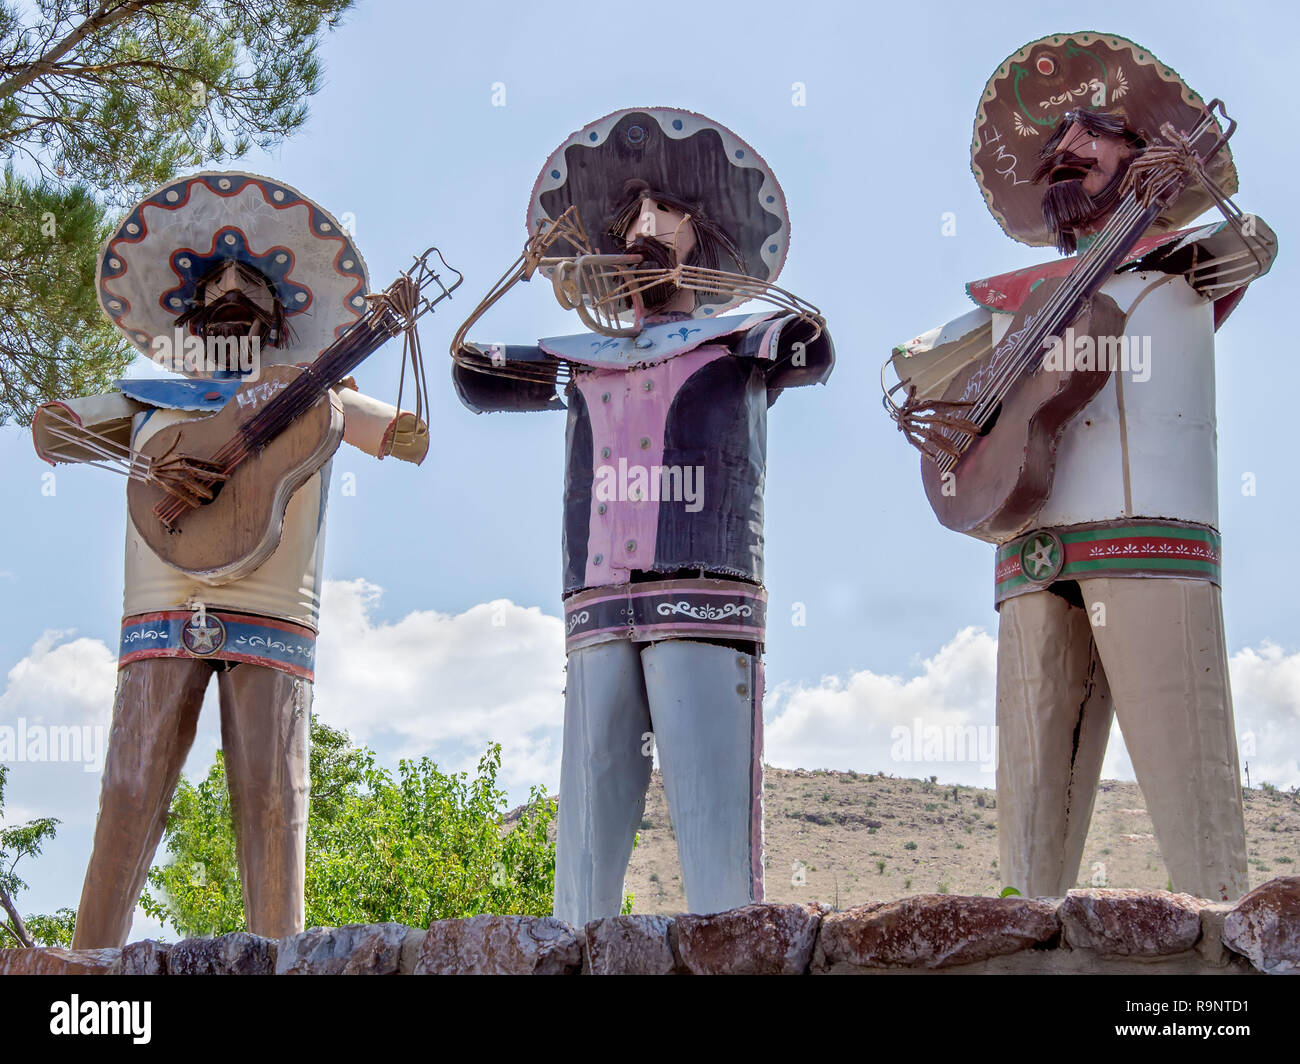 Sculptures of Mariachis in the traditionally Hispanic part of the city of Alpine, west Texas Stock Photo